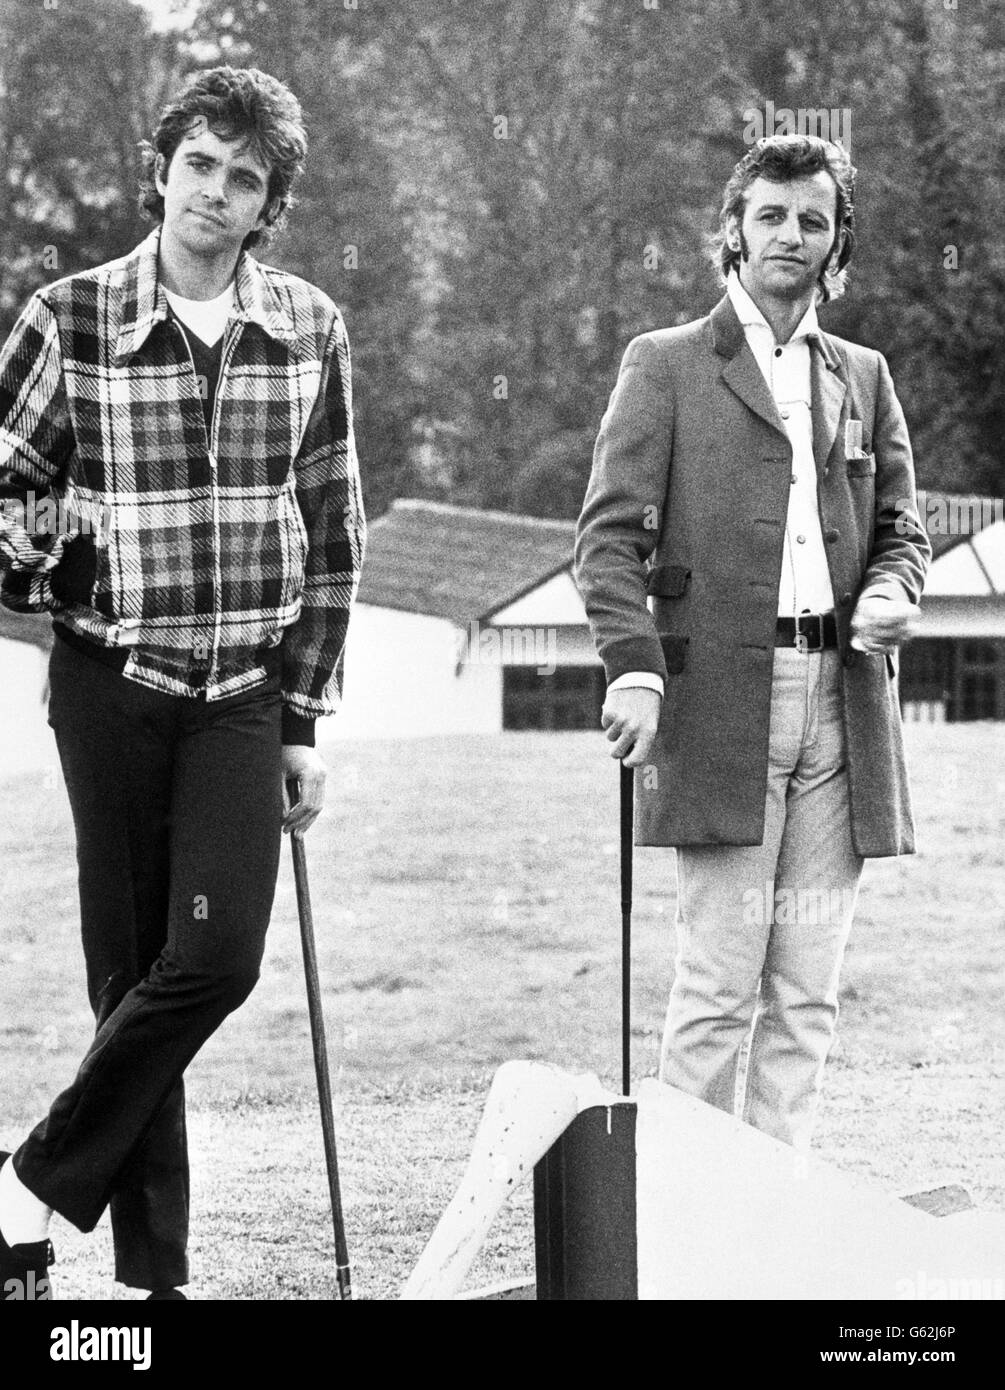 Musicians-turned-actors David Essex and Ringo Starr in a scene from the film That'll Be the Day. They play anti-heroes Jim and Mike, who run a holiday camp and enjoy short-changing customers. Stock Photo